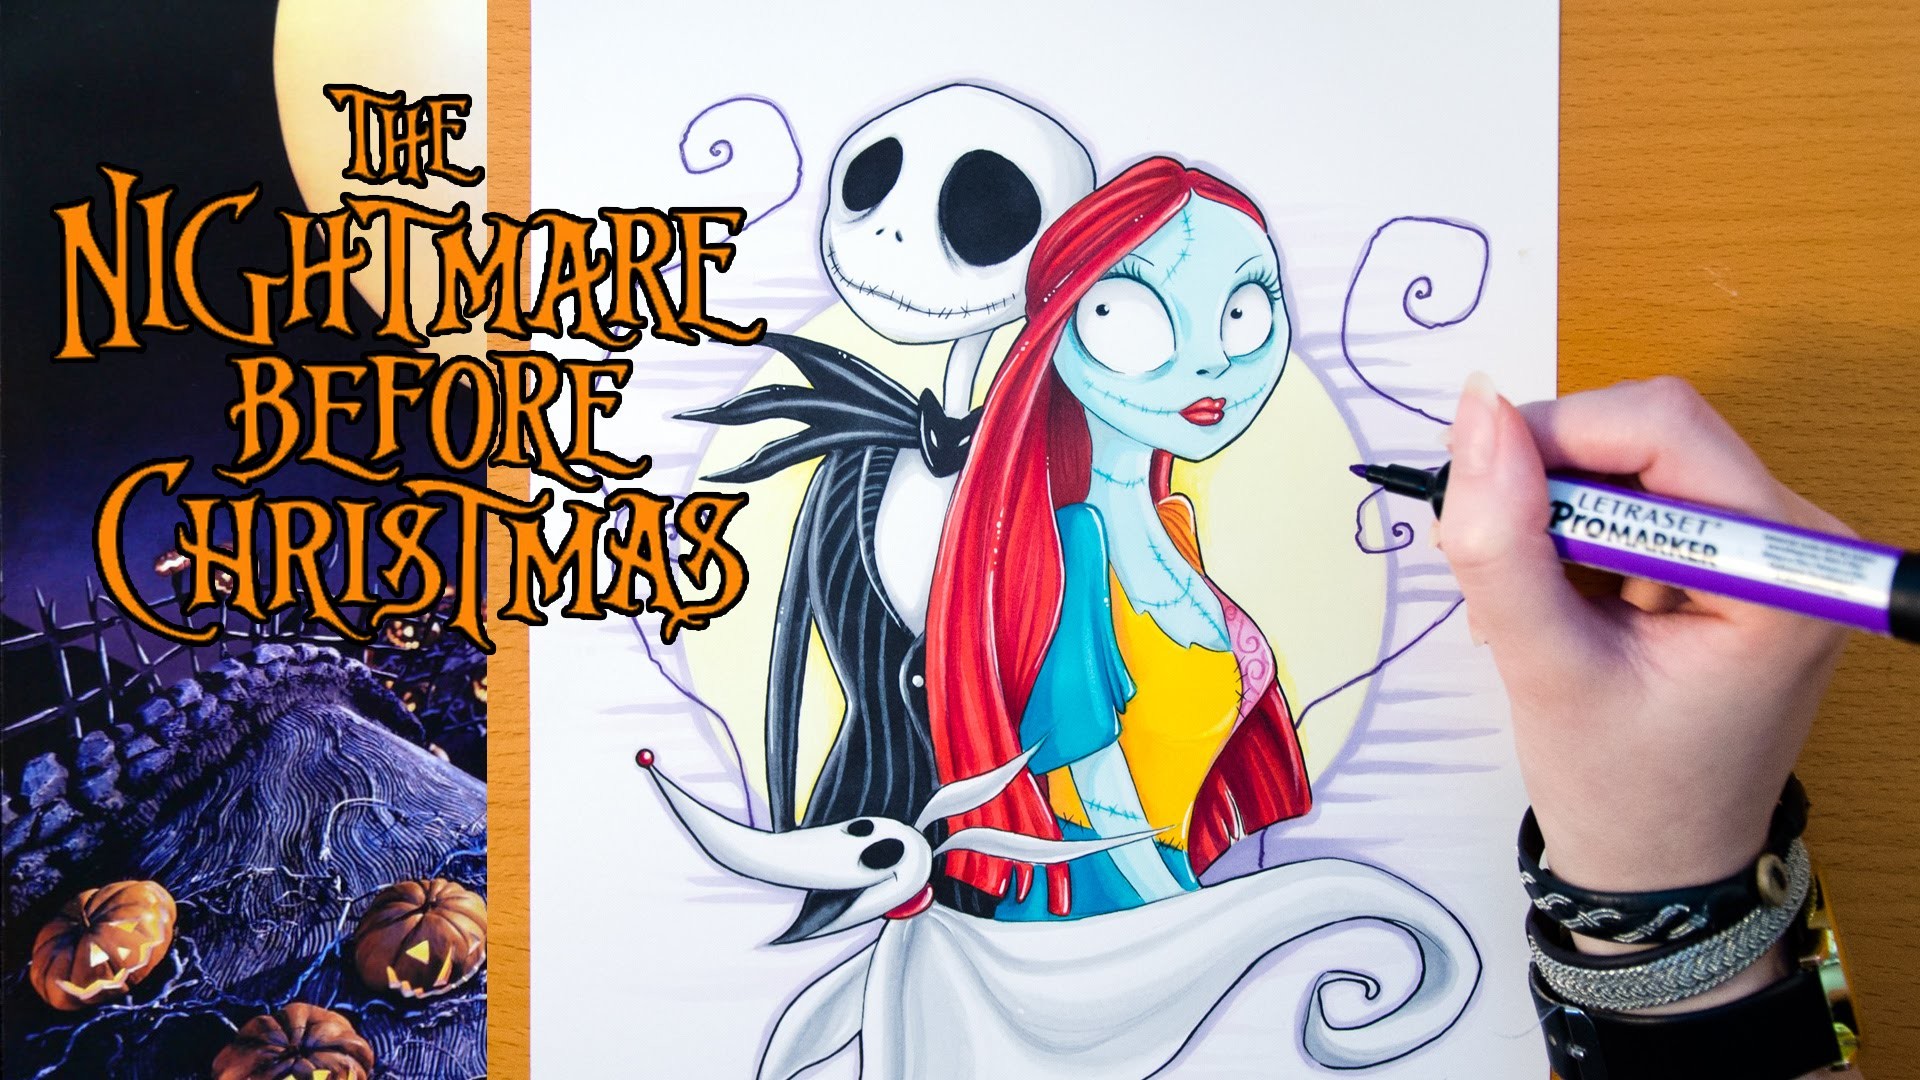 1920x1080 Speed Drawing The Nightmare Before Christmas 1920x1080.